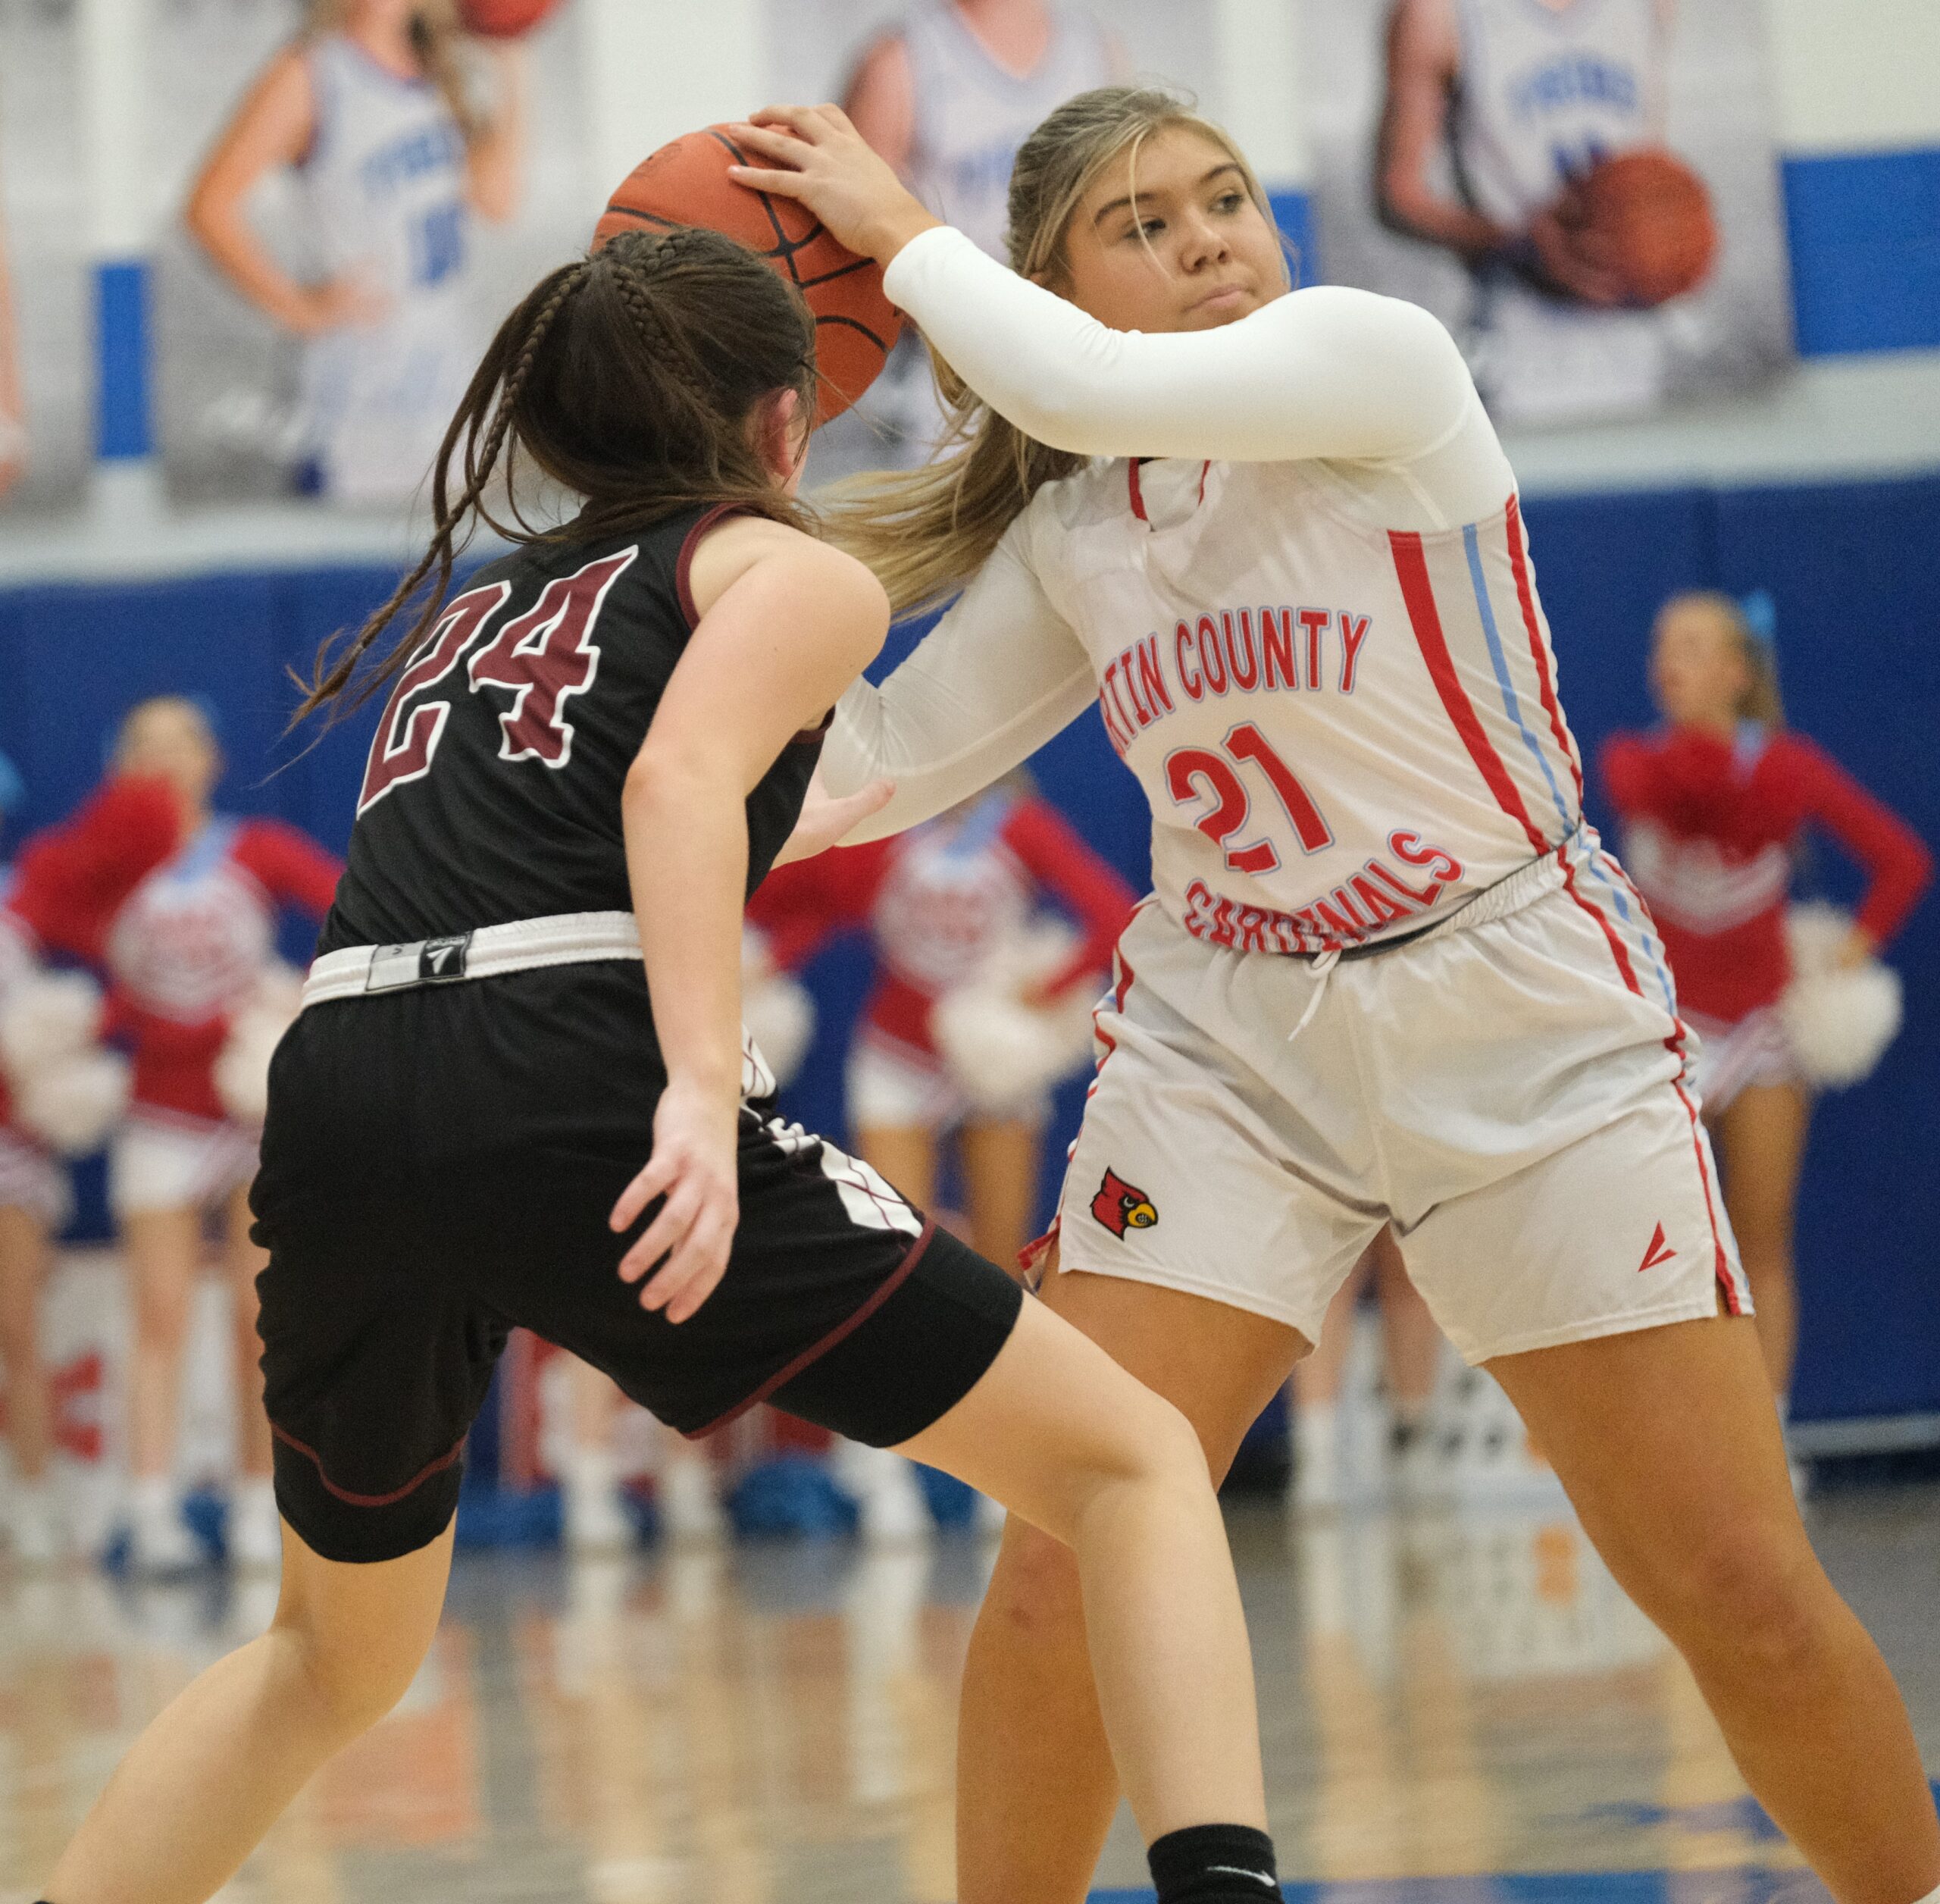 Martin County Lady Cardinals vs. Magoffin County in the 57th District Tournament [GALLERY]